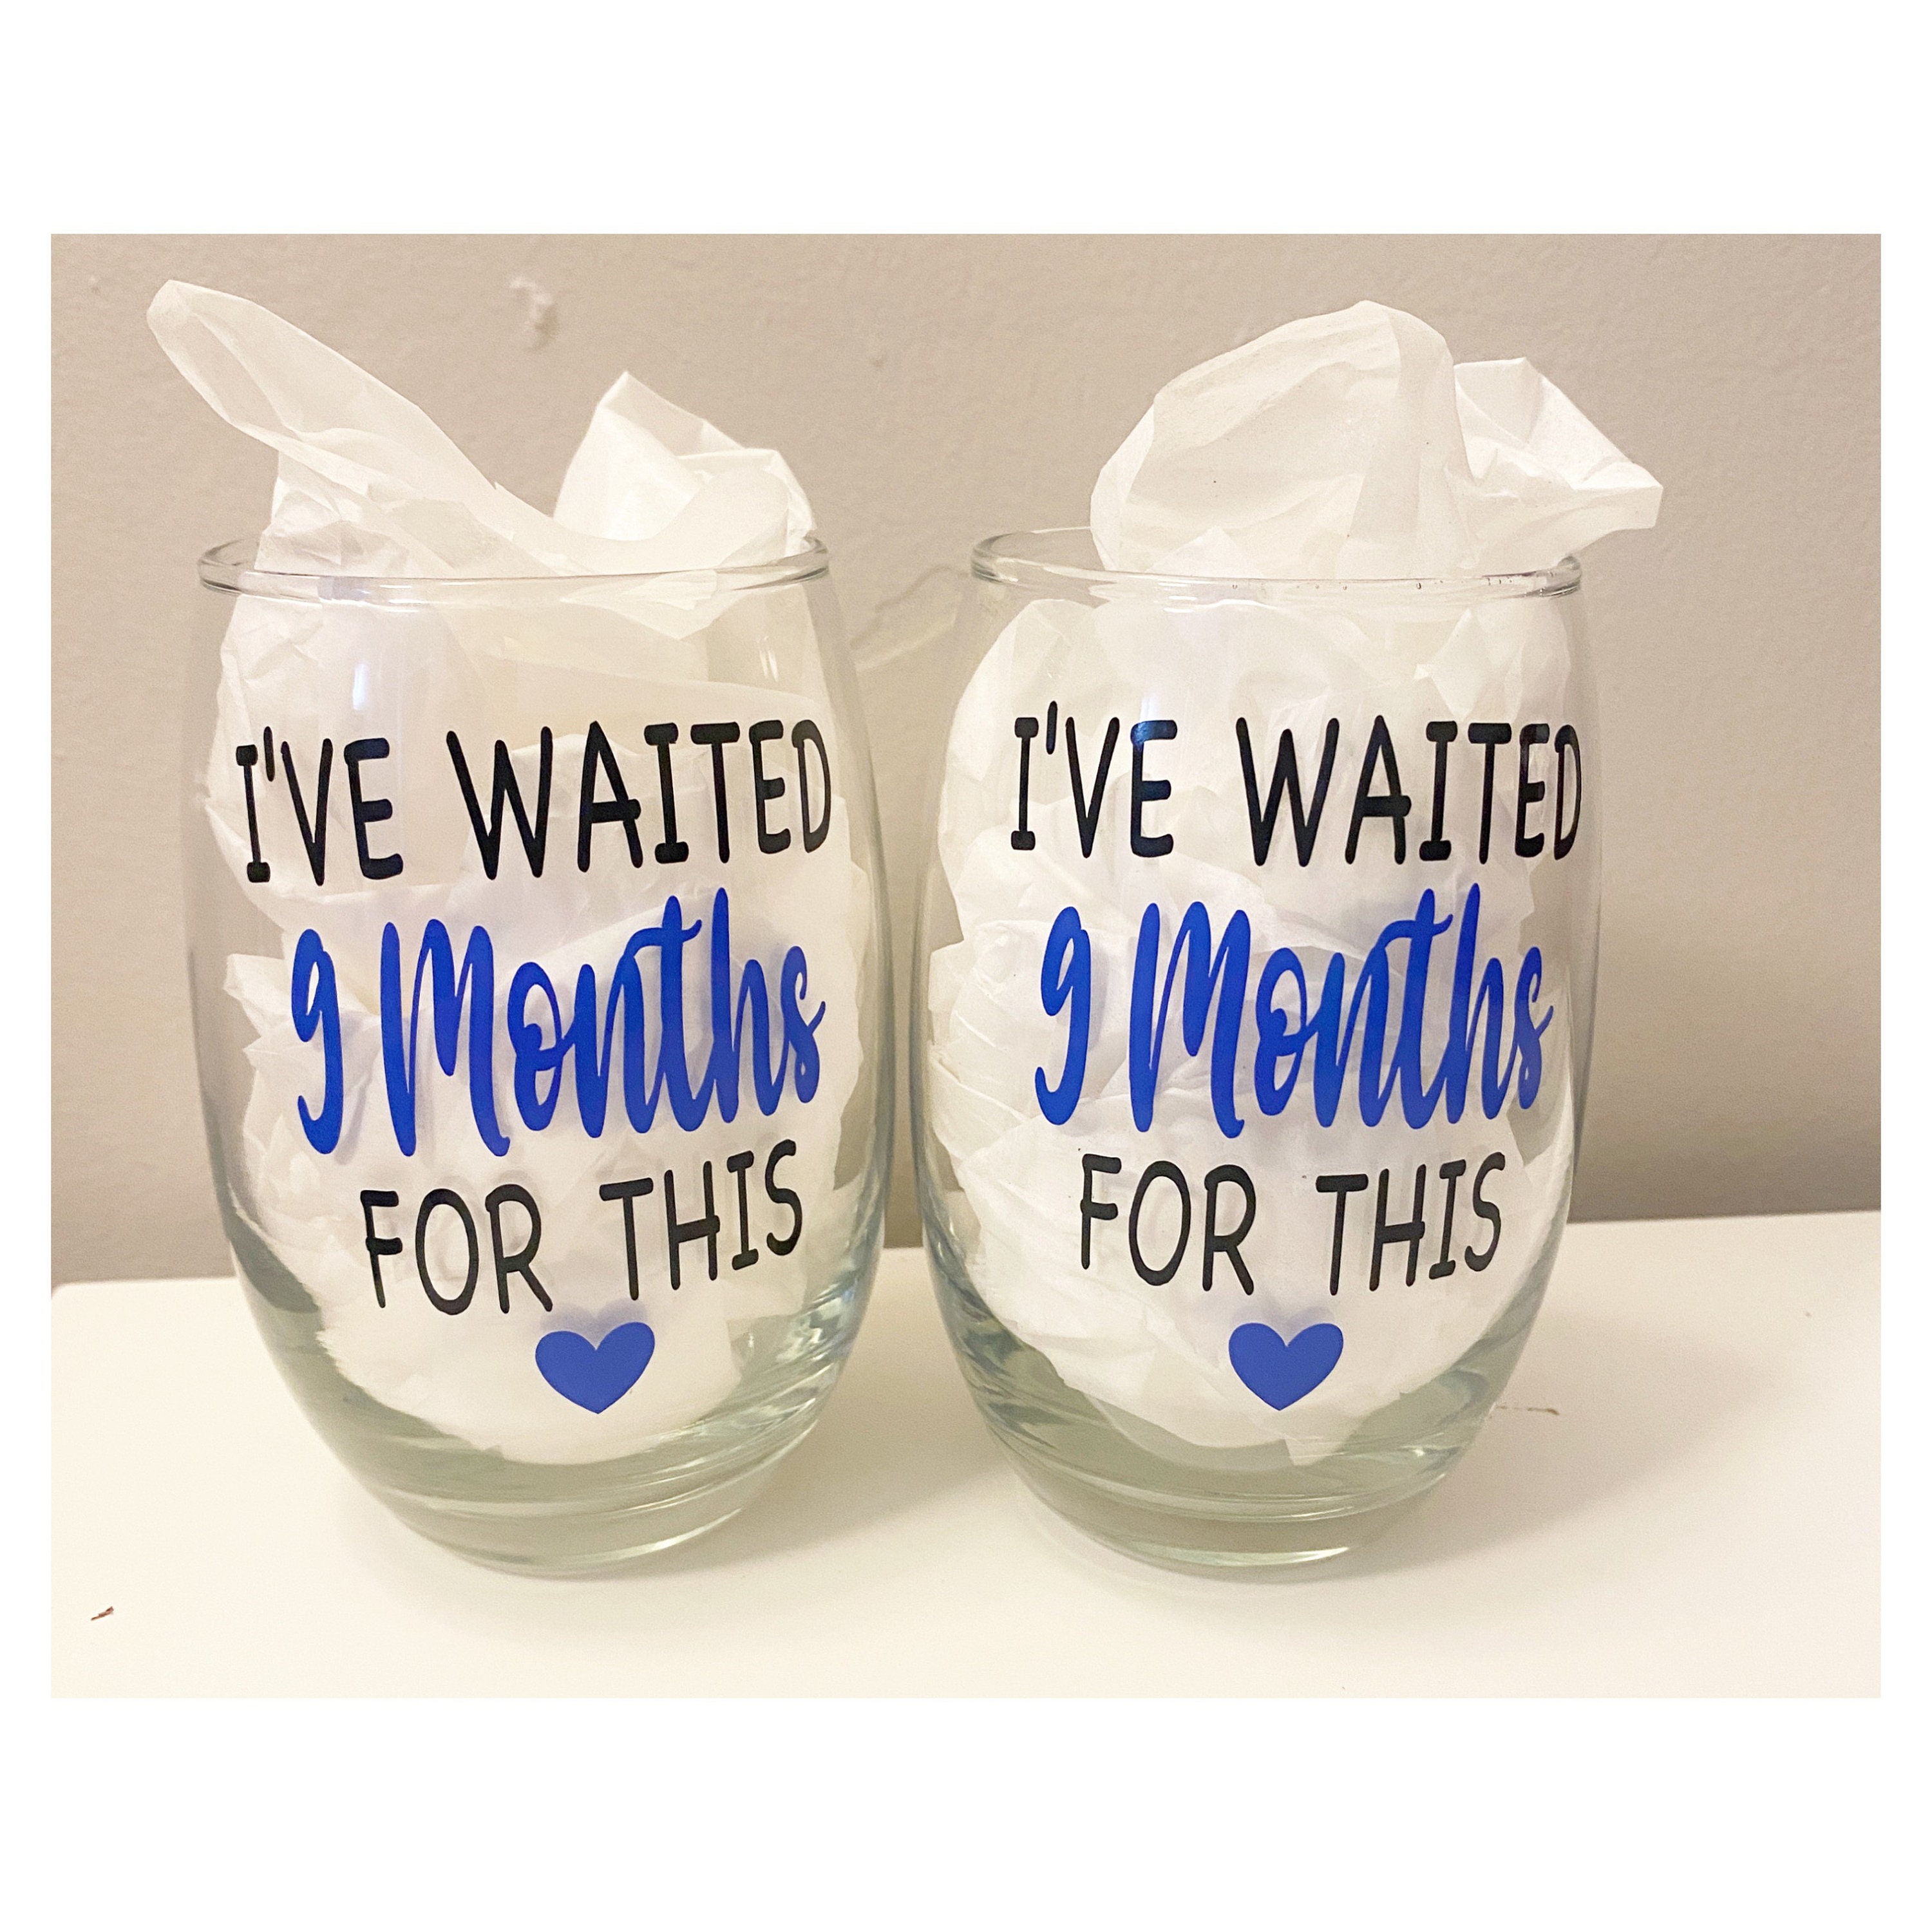 Waited 9 Months For This - Funny New Mom Stemless Wine Glass - Gift Gl -  bevvee